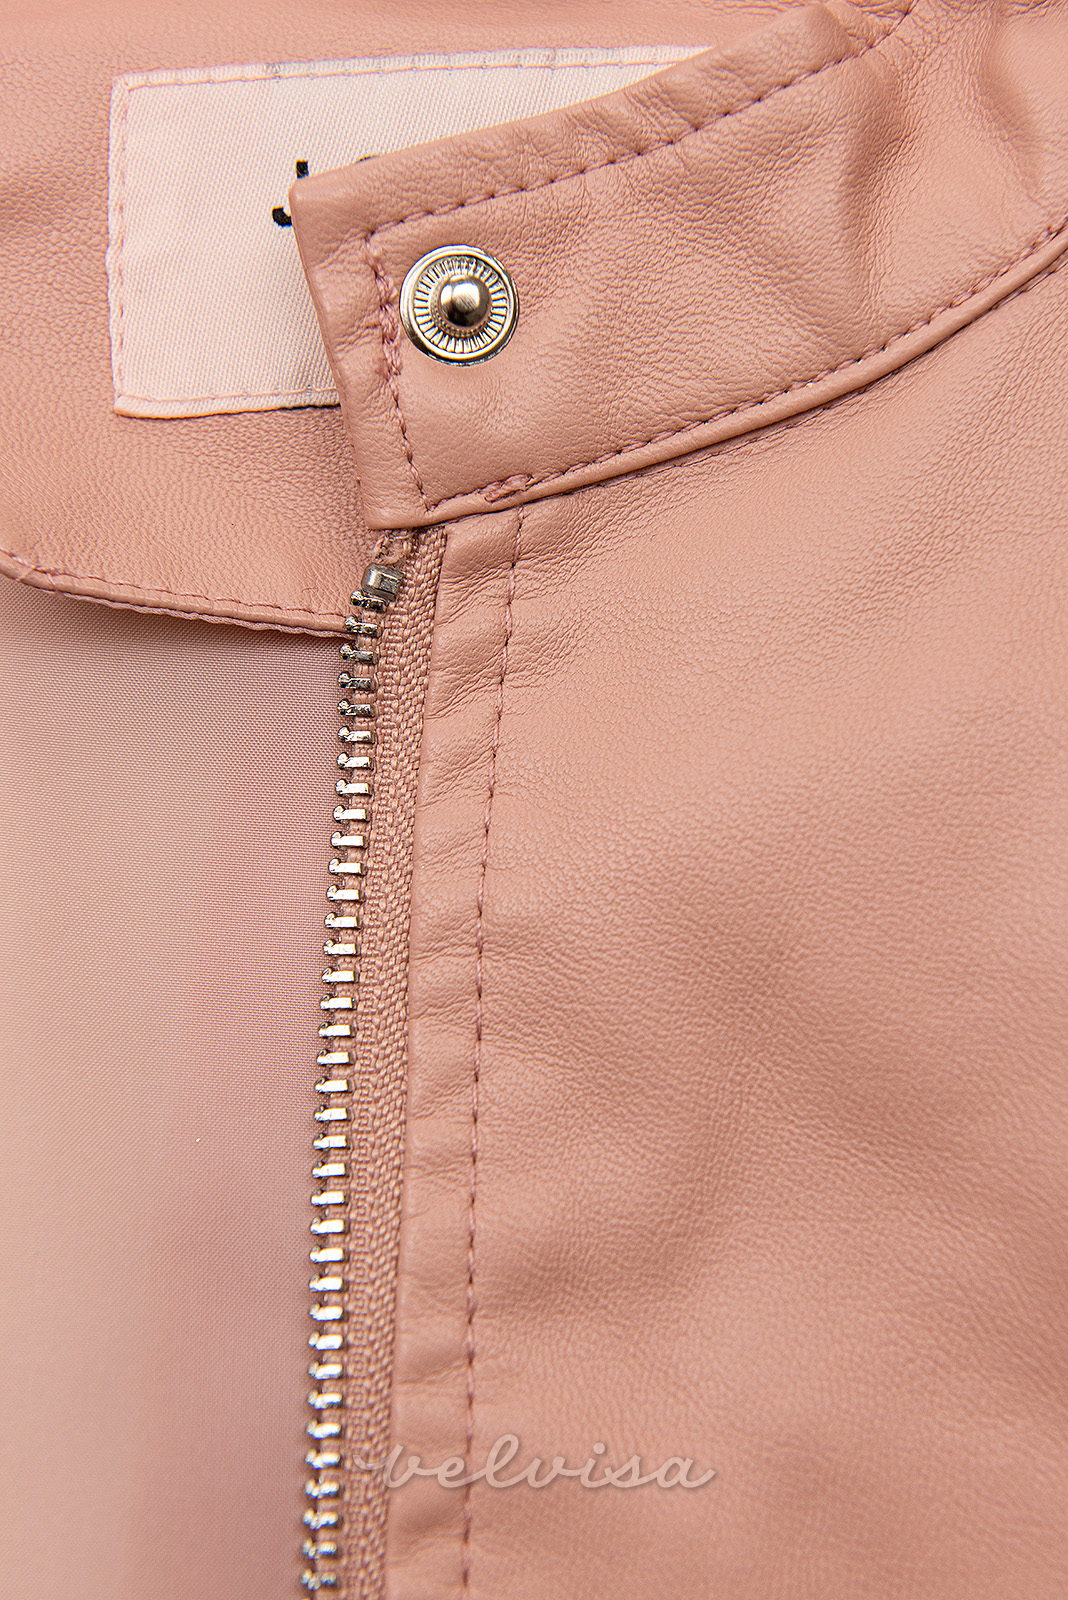 Giacca basic in similpelle rosa